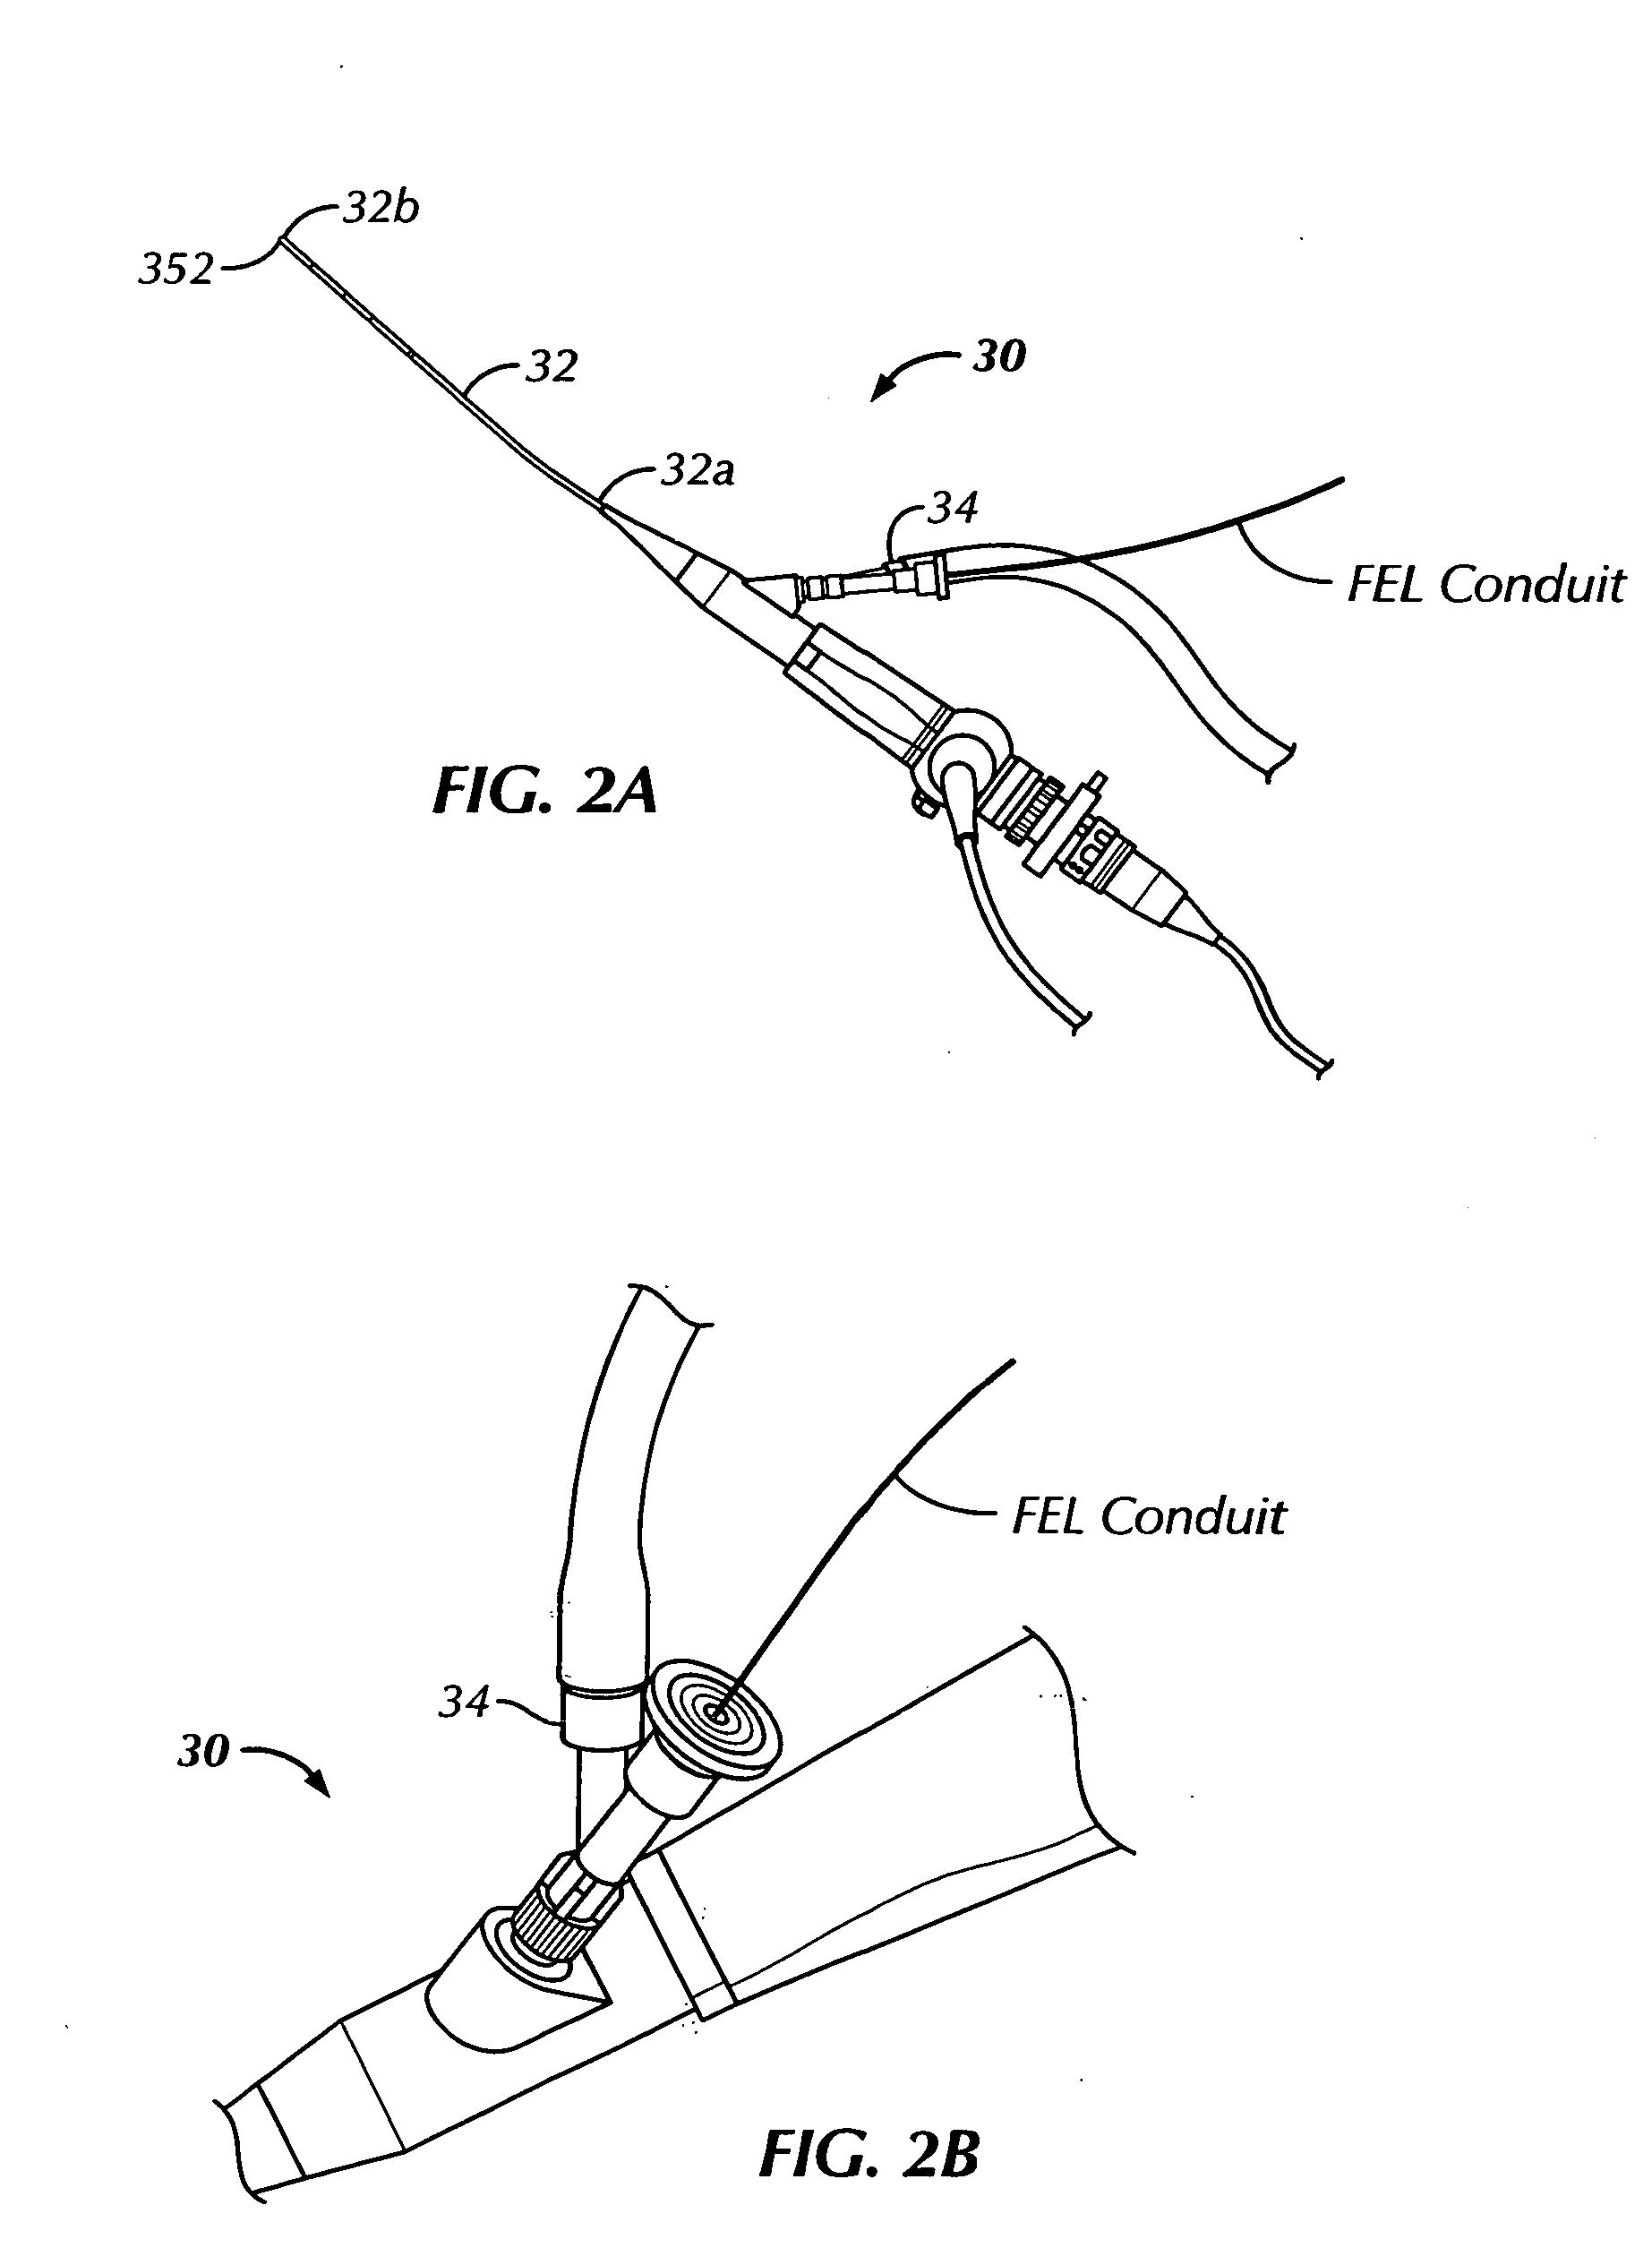 Ophthalmic orbital surgery apparatus and method and image-guided navigation system